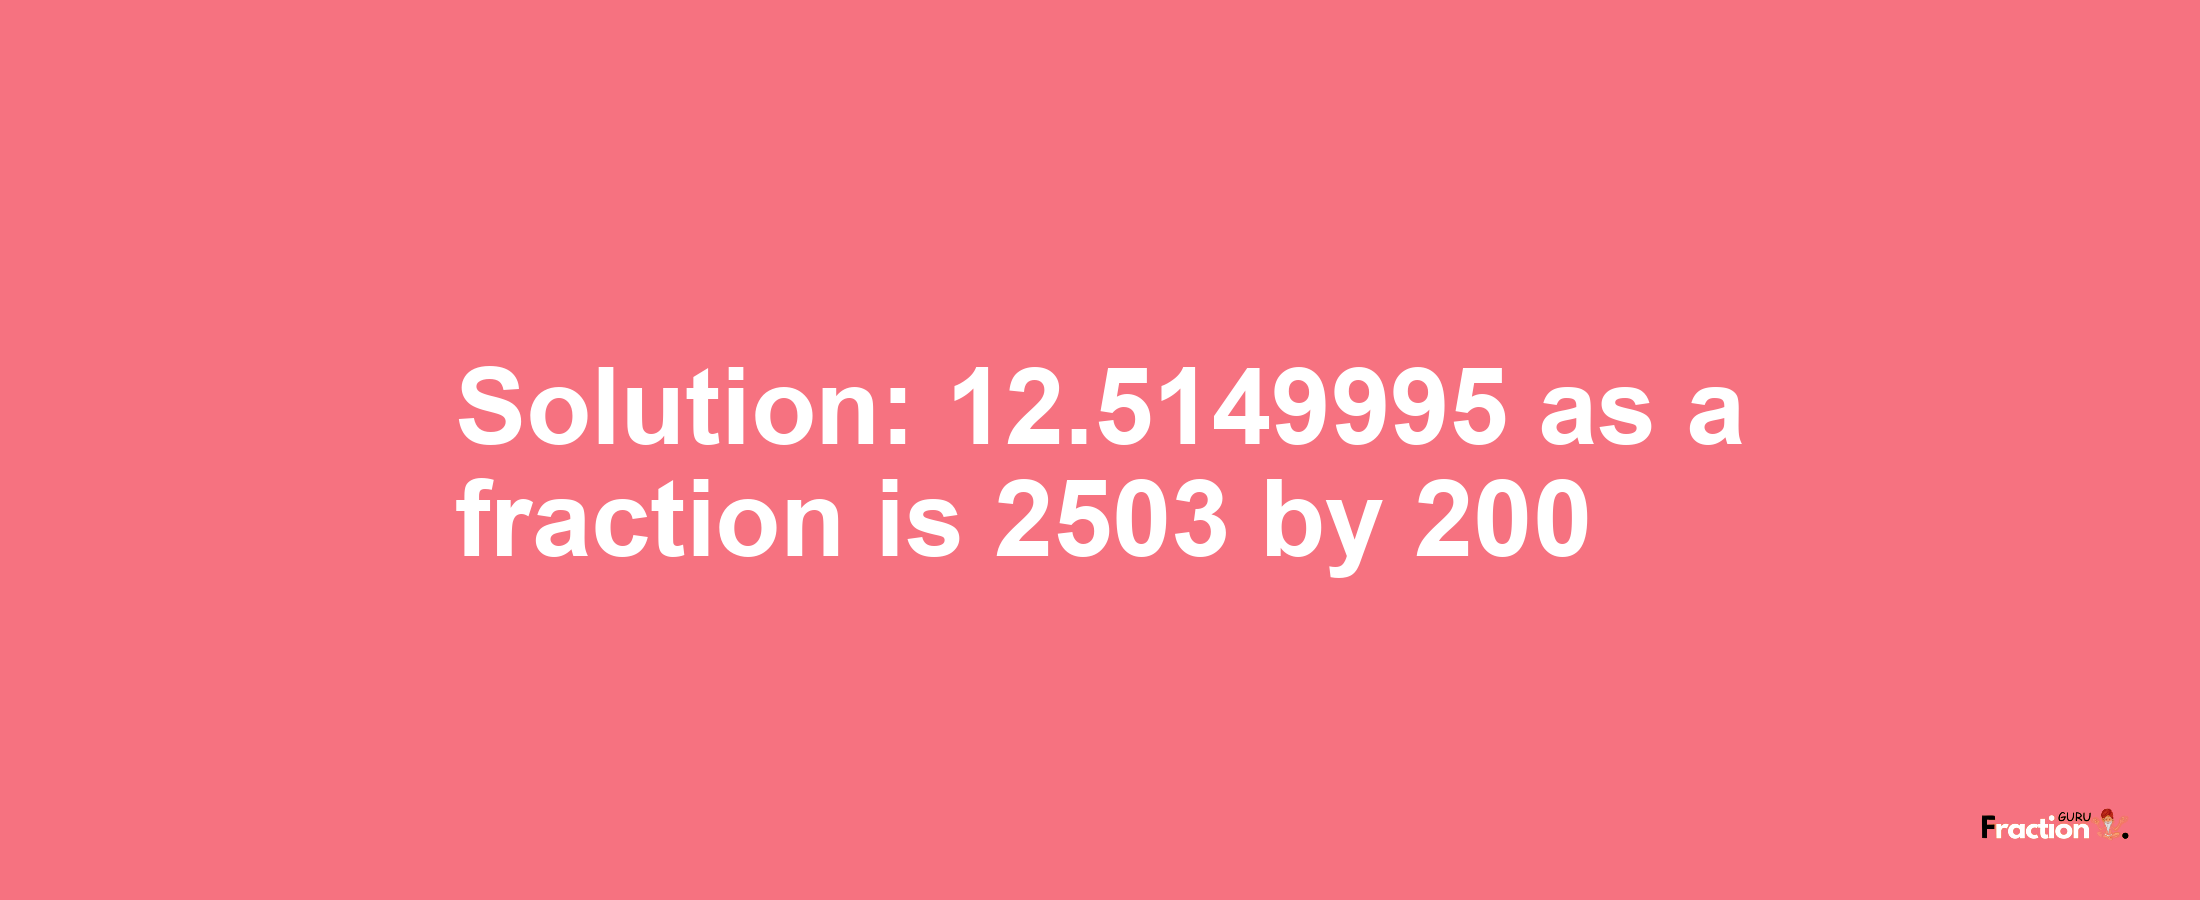 Solution:12.5149995 as a fraction is 2503/200